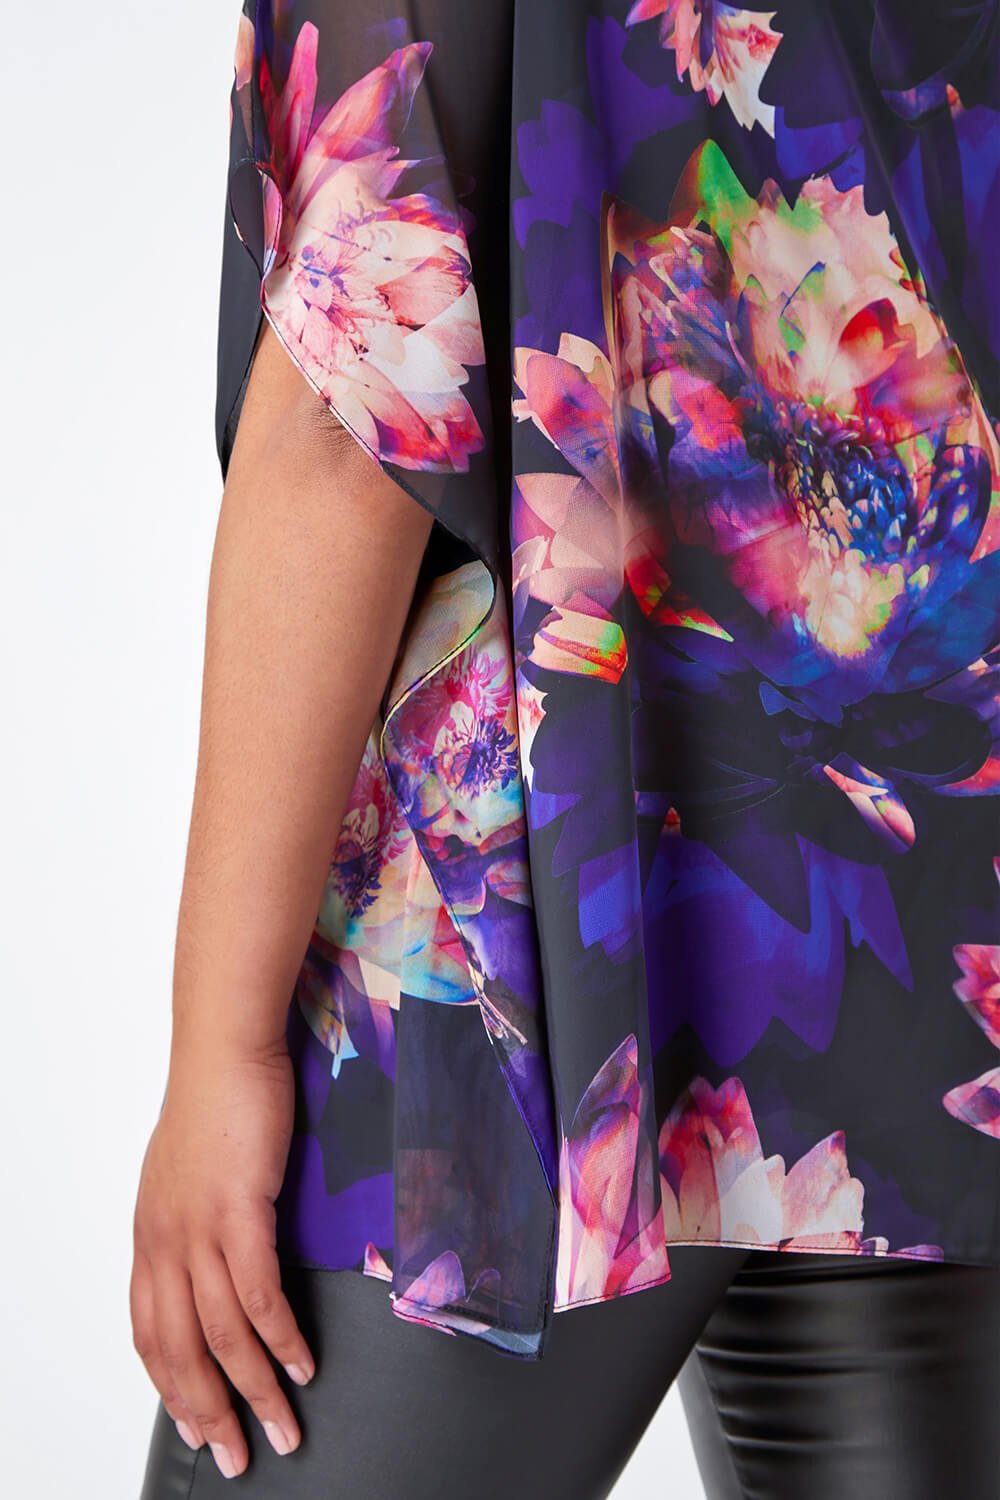 Black Curve Floral Print Chiffon Overlay Top, Image 5 of 5